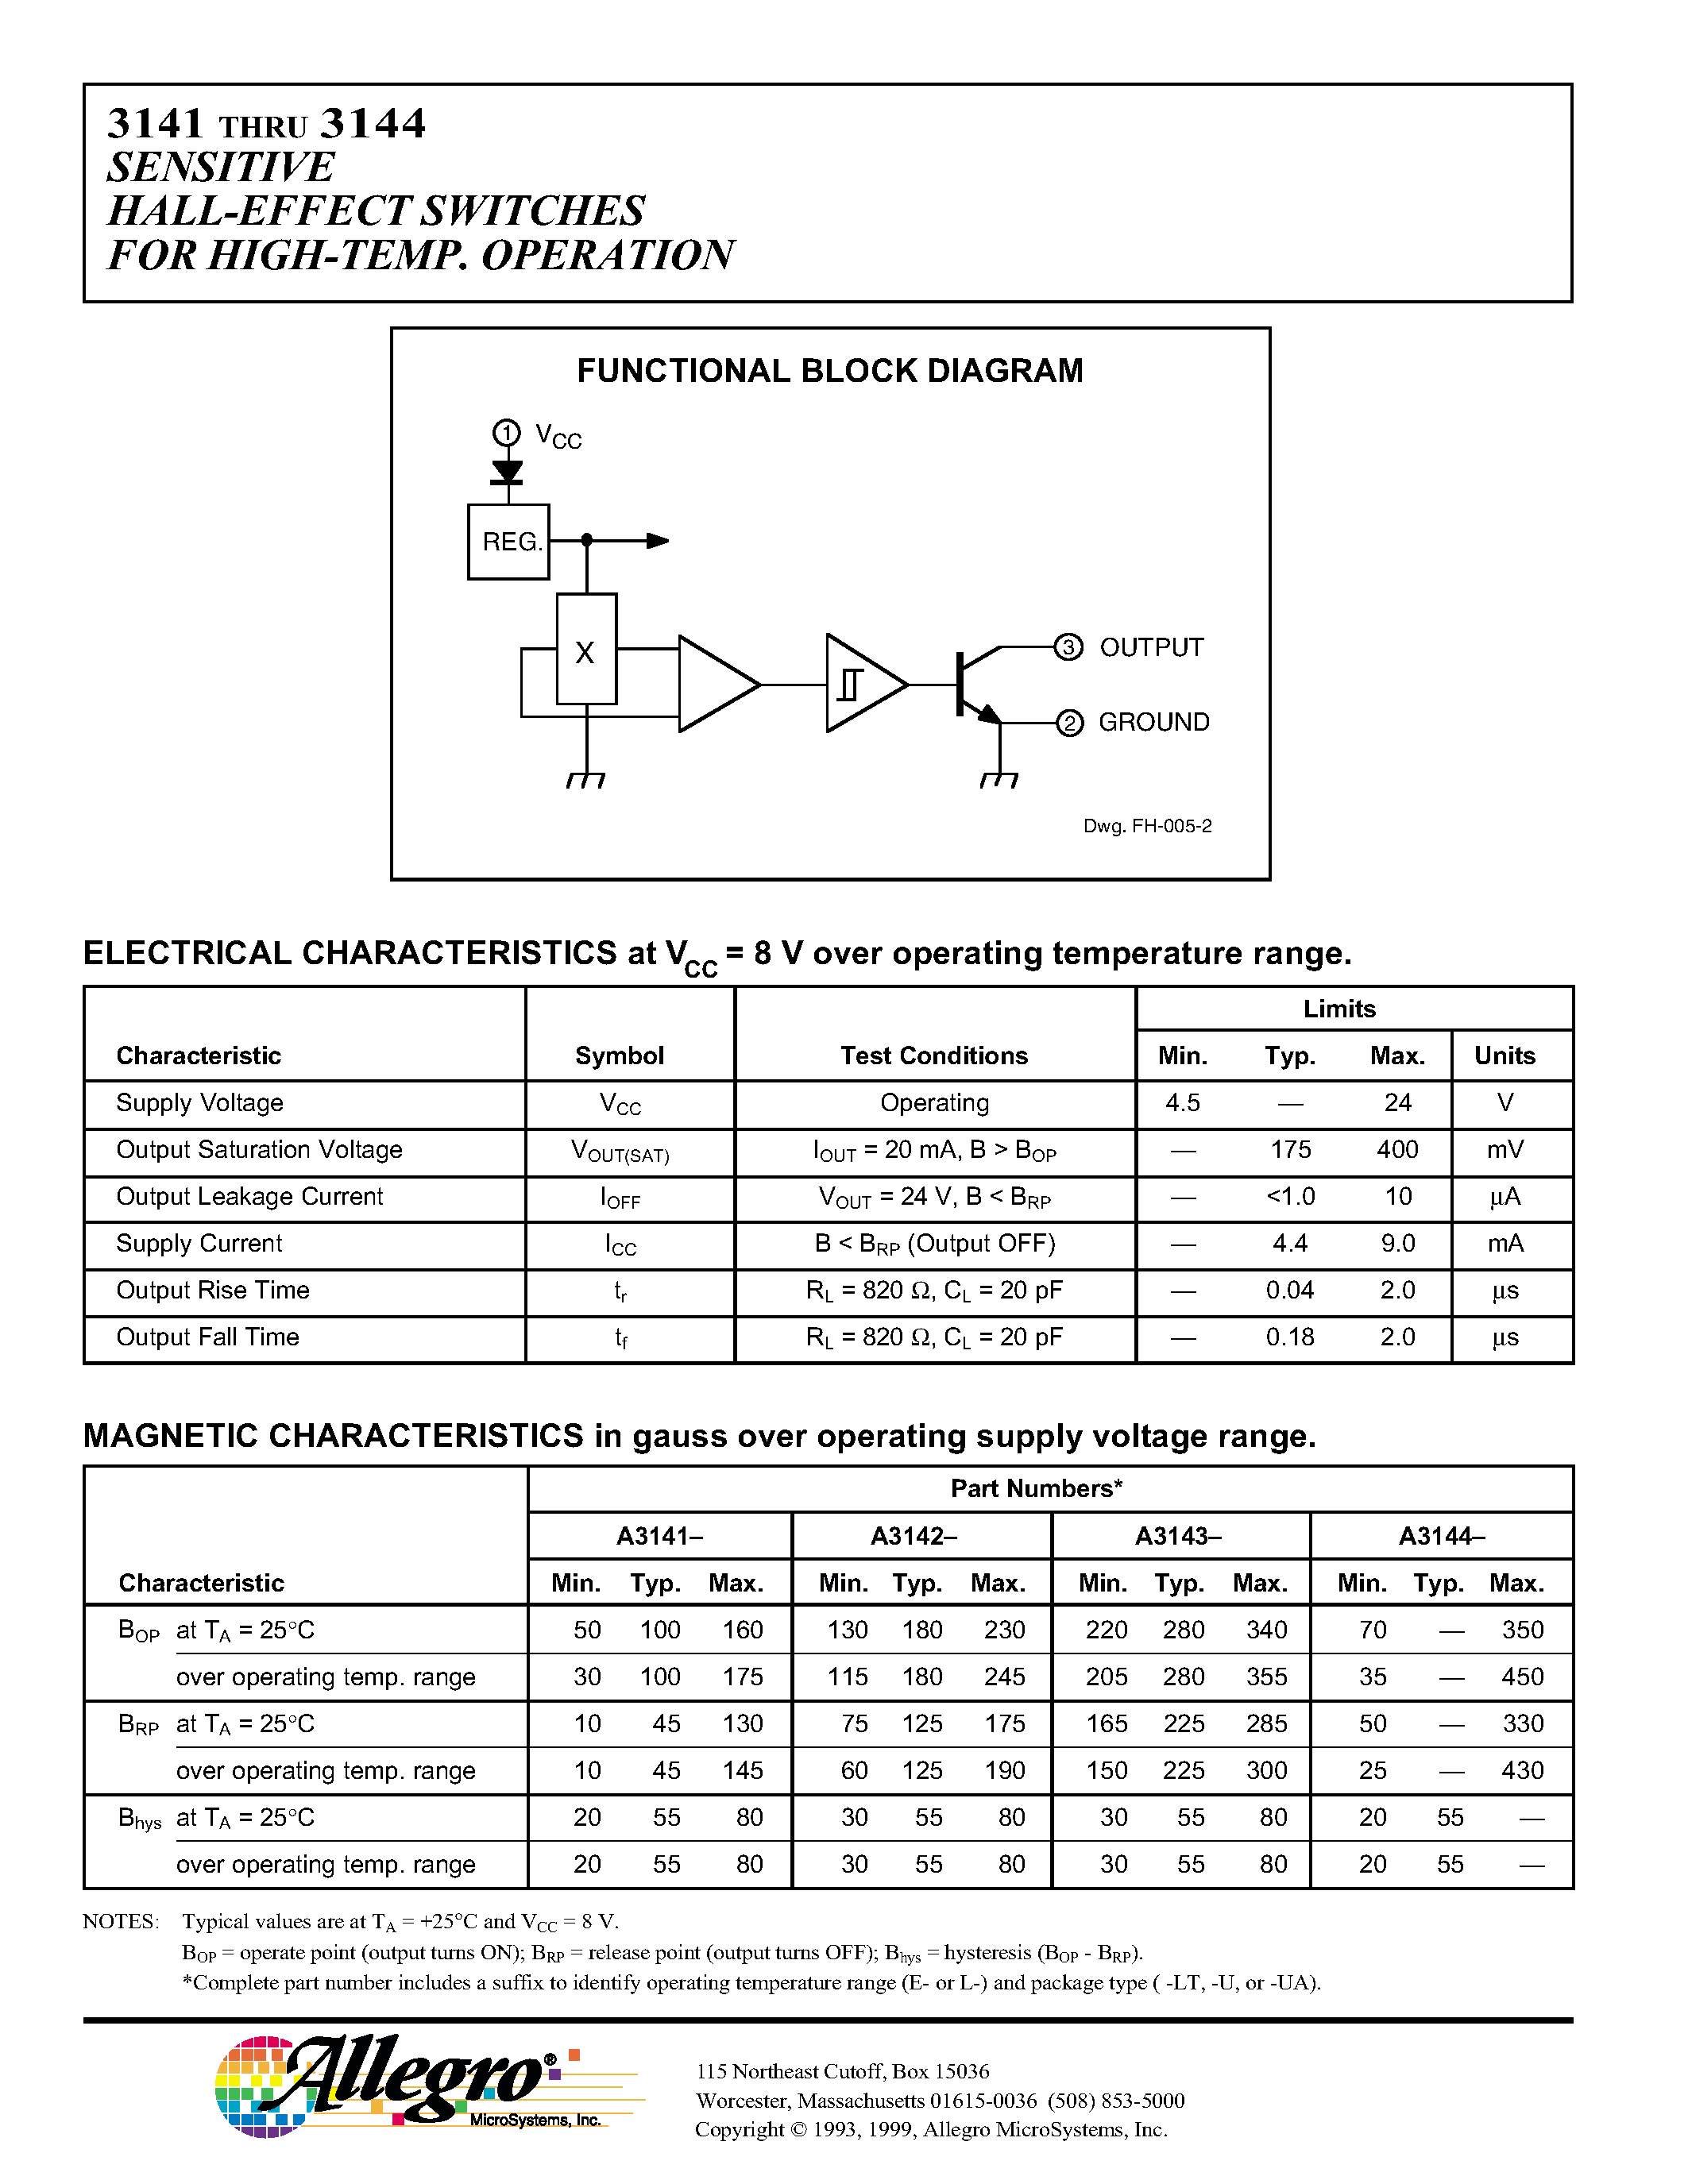 Даташит A3144-U - SENSITIVE HALL-EFFECT SWITCHES FOR HIGH-TEMPERATURE OPERATION страница 2